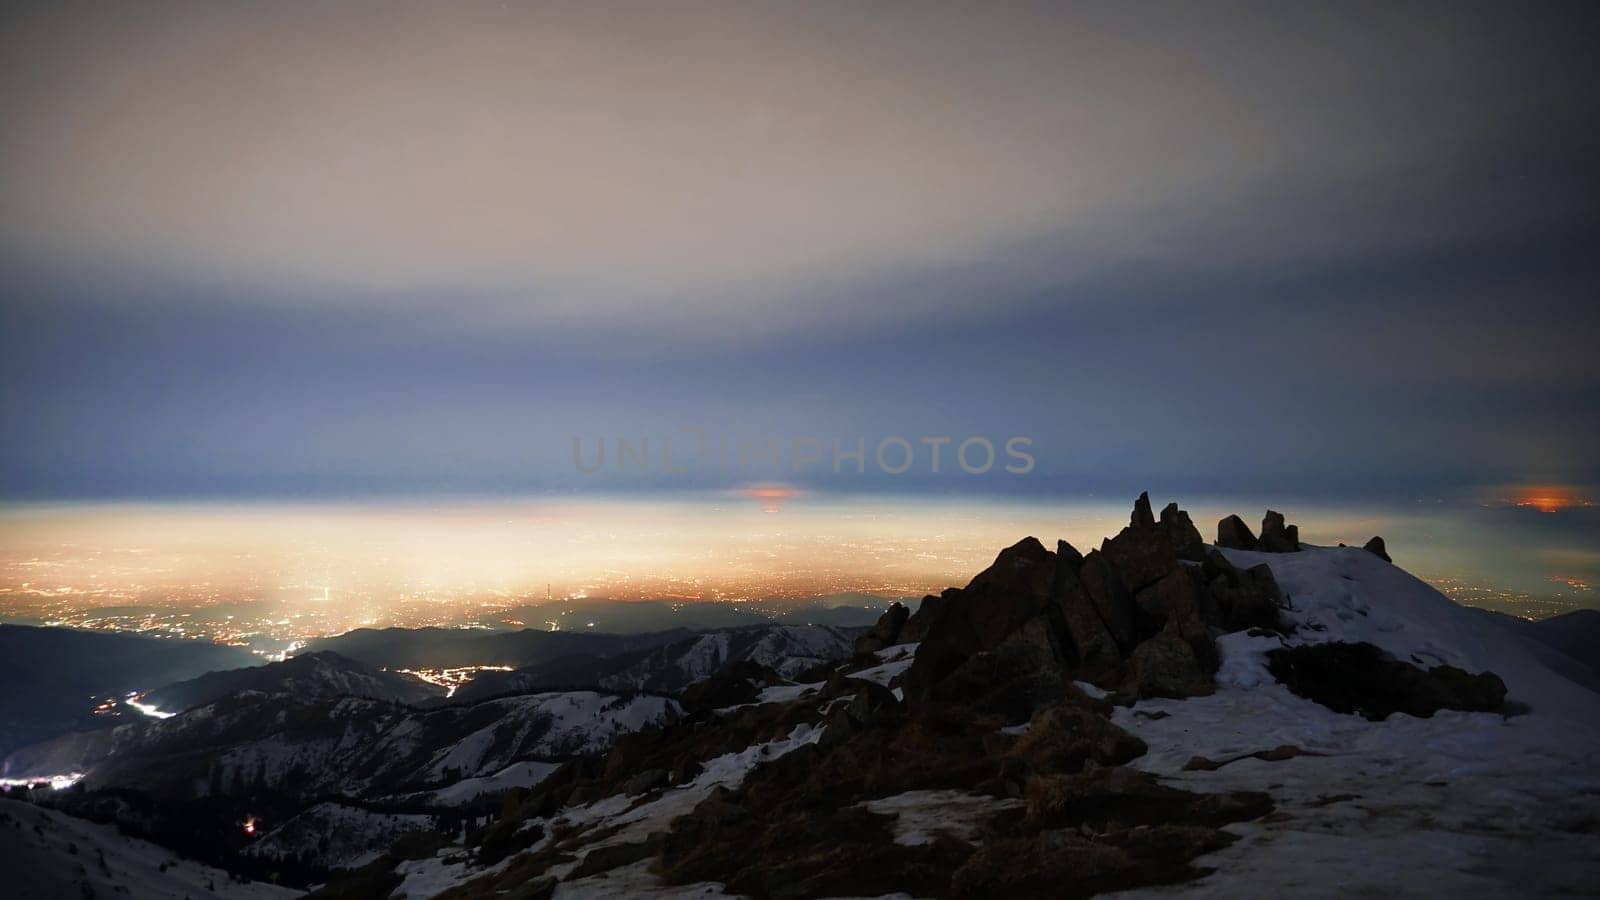 View of the night city from the snowy mountains by Passcal